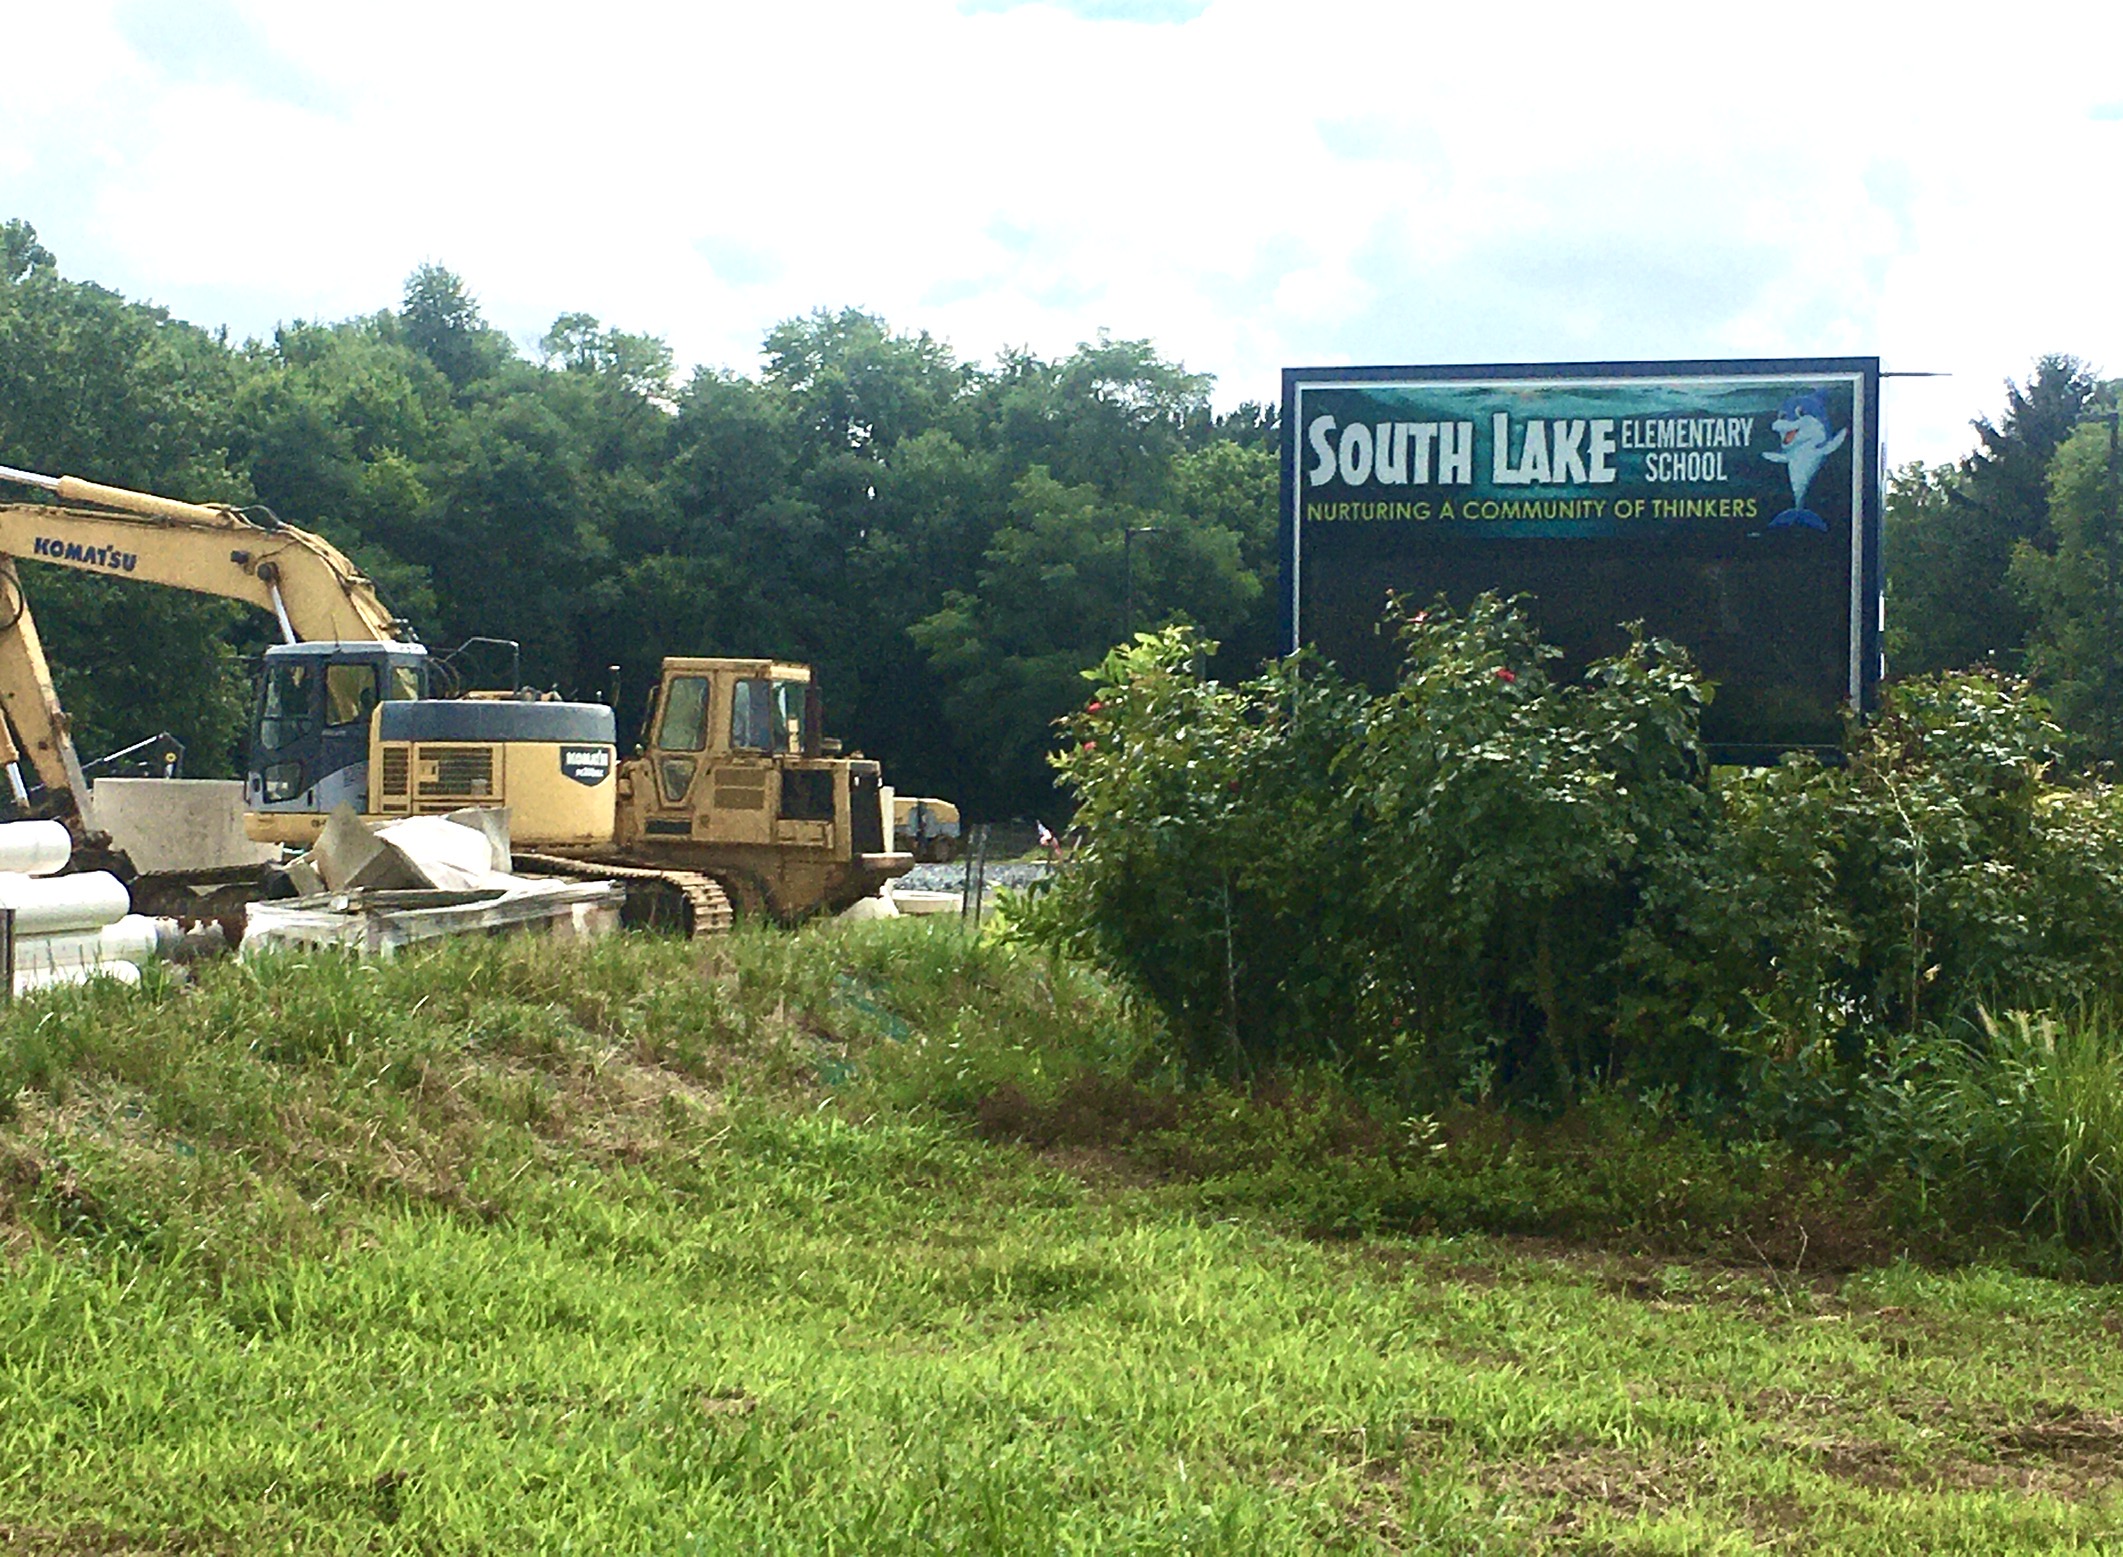 Construction is underway to replace South Lake's demolished structure on Contour Road with a target date in 2023